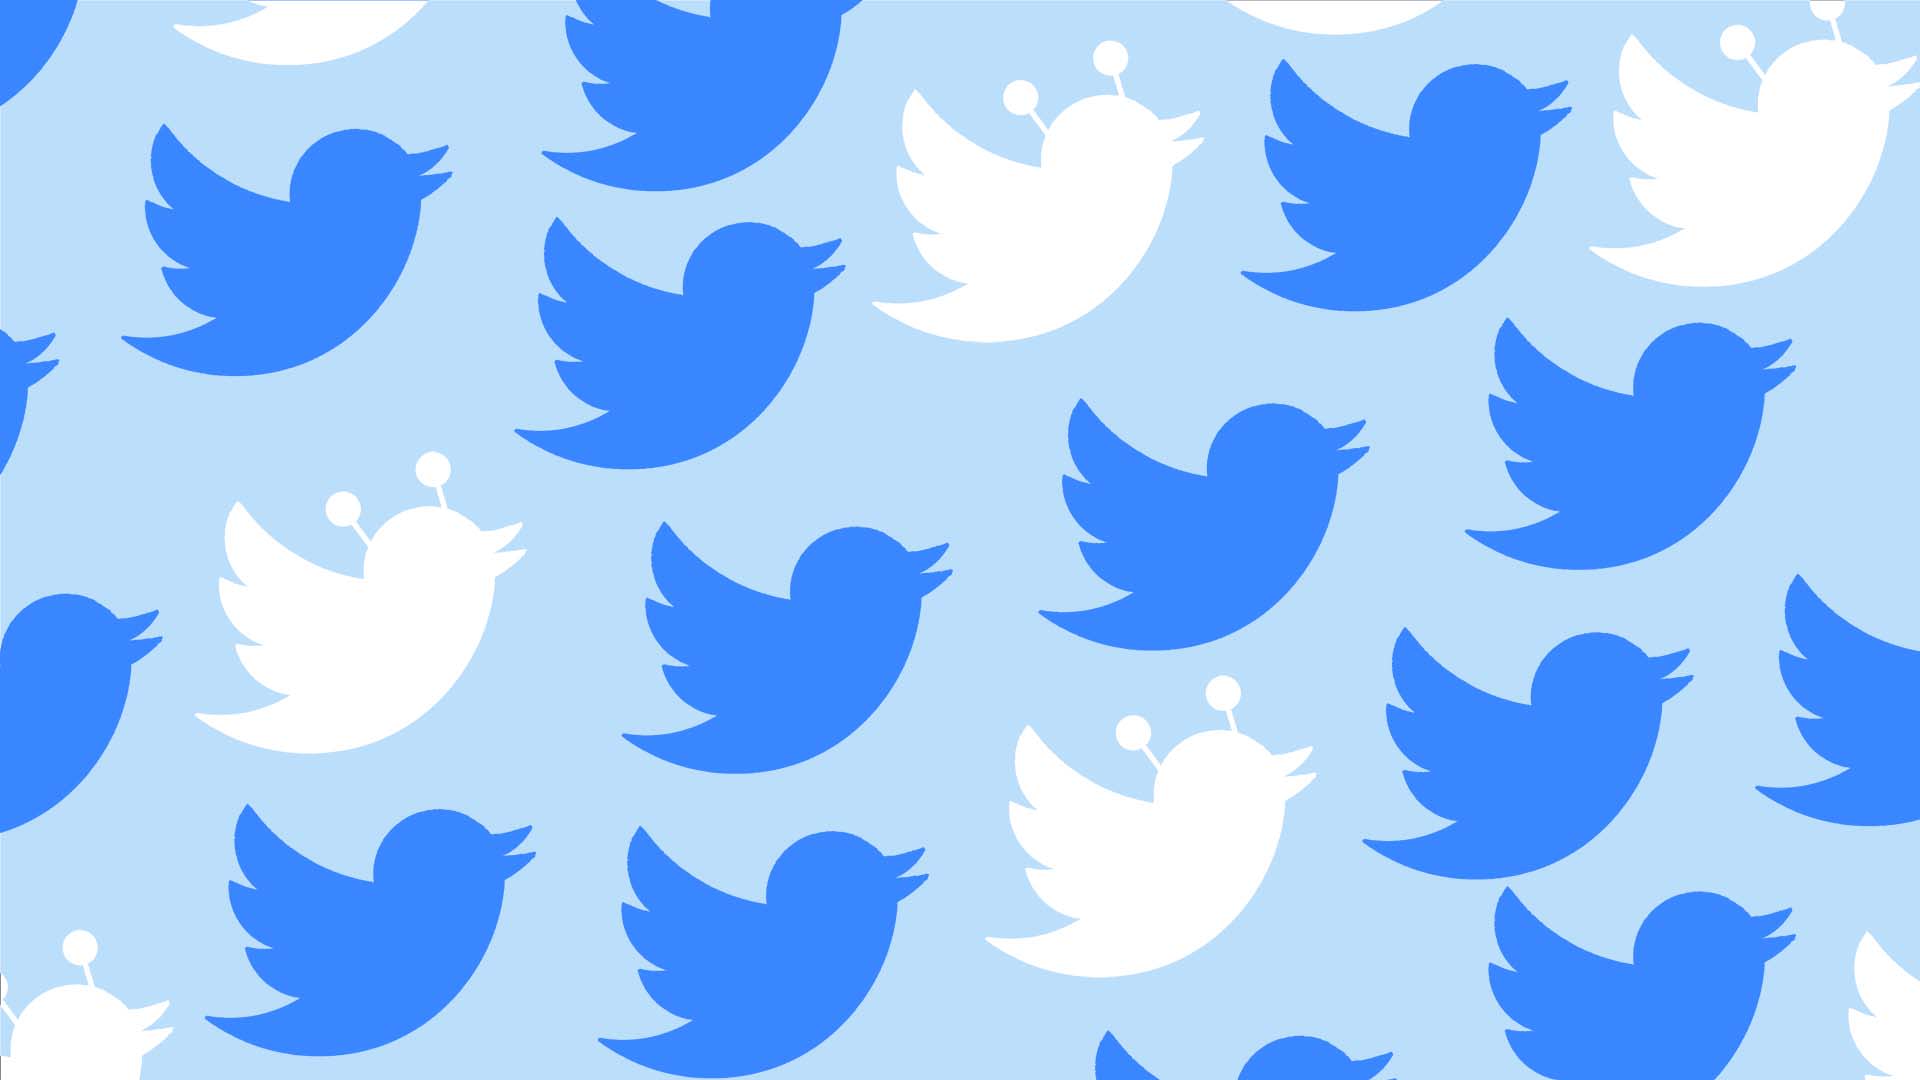 Do You Have Fake Followers? 4 Tools to Analyze Your Twitter Account